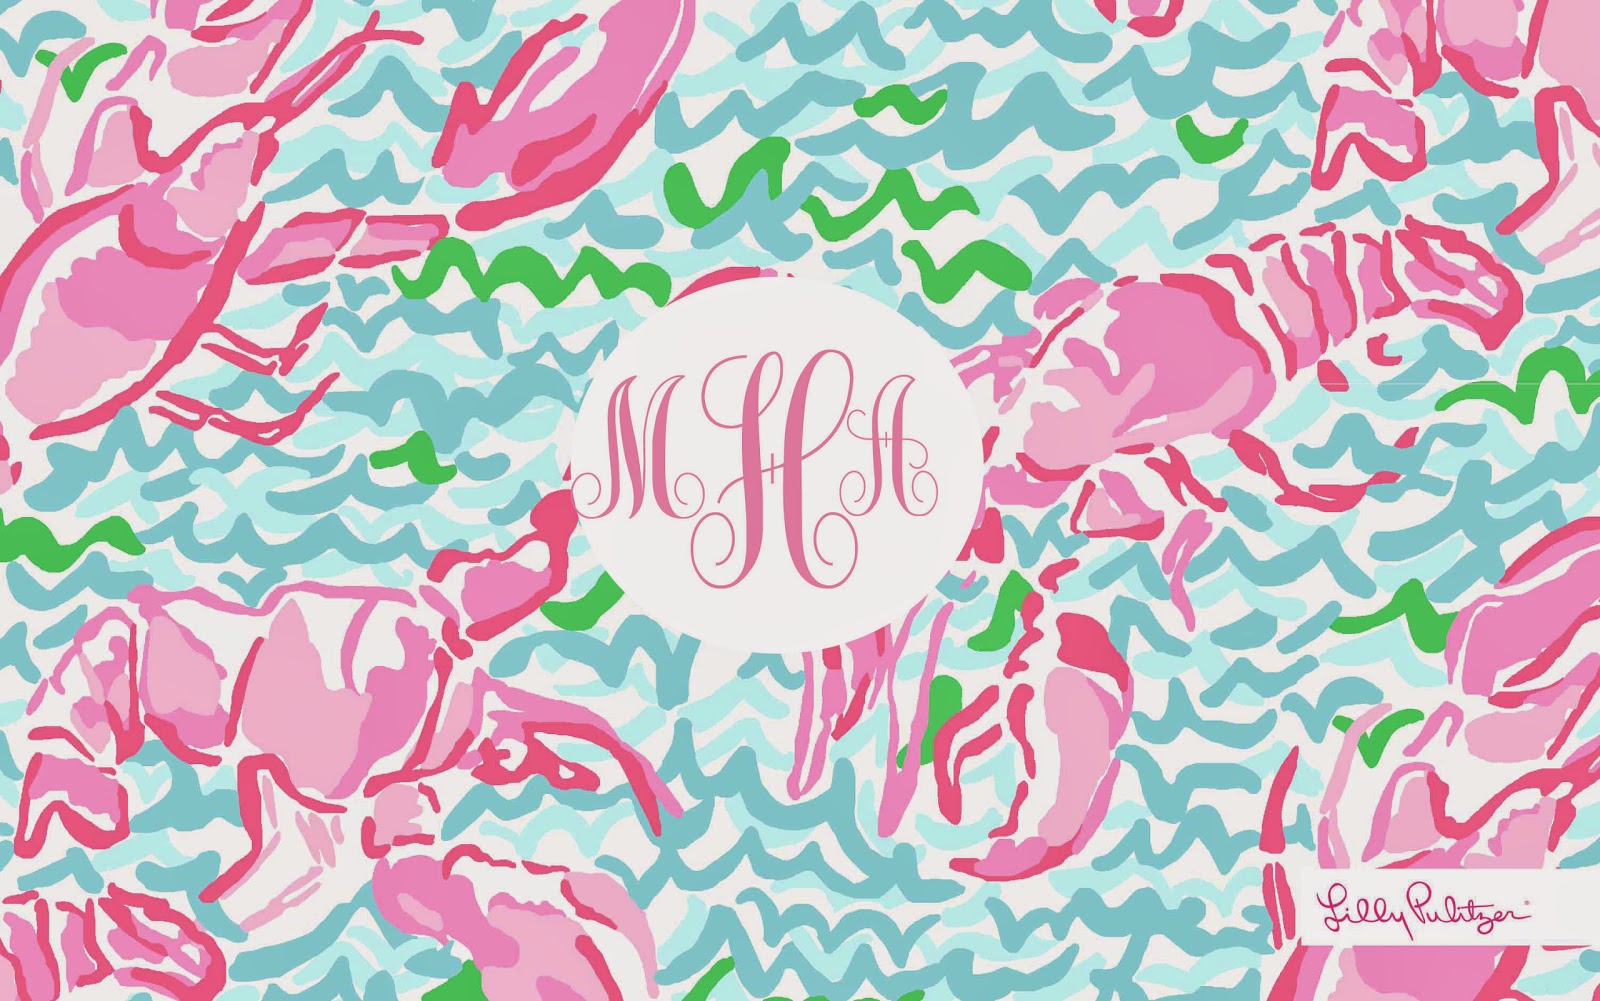 The Northern Southern Belle Monogrammed Lilly Pulitzer Desktop